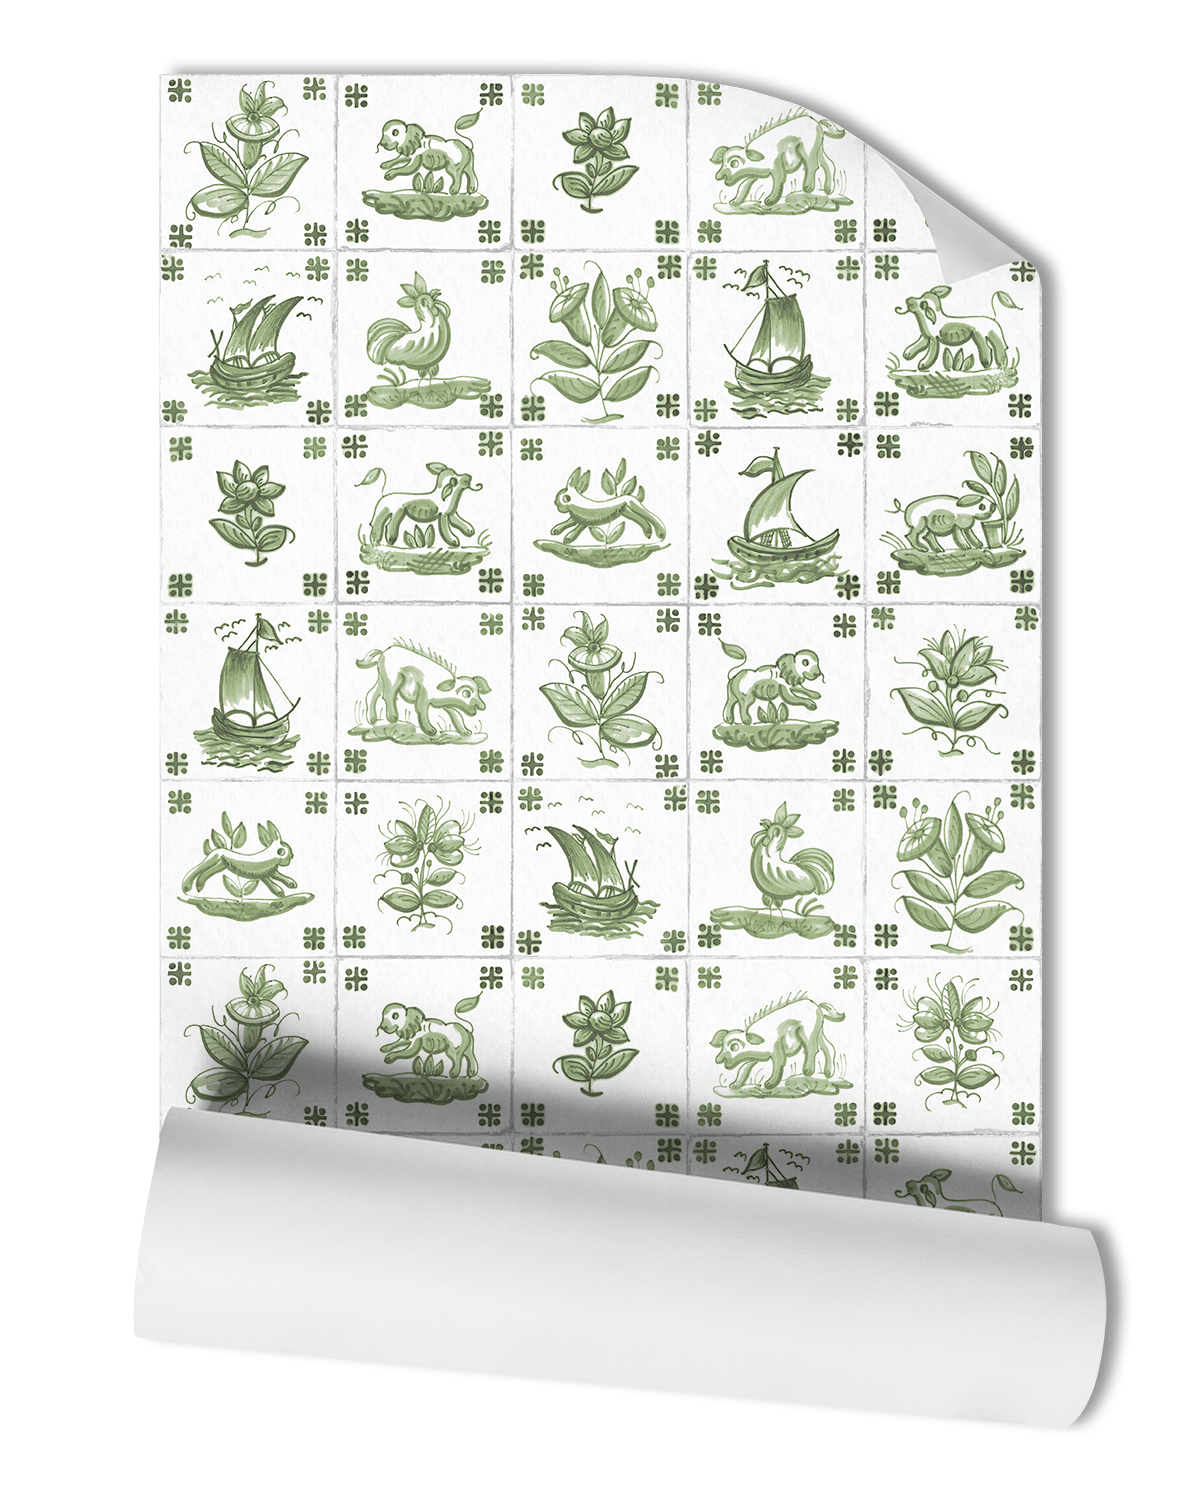 Elevate your space with our Antique Delft Wallpaper in Basil, featuring green-painted delft motifs on white tiles reminiscent of Portuguese tiles. The intricate tile design adds a touch of elegance and vintage charm.